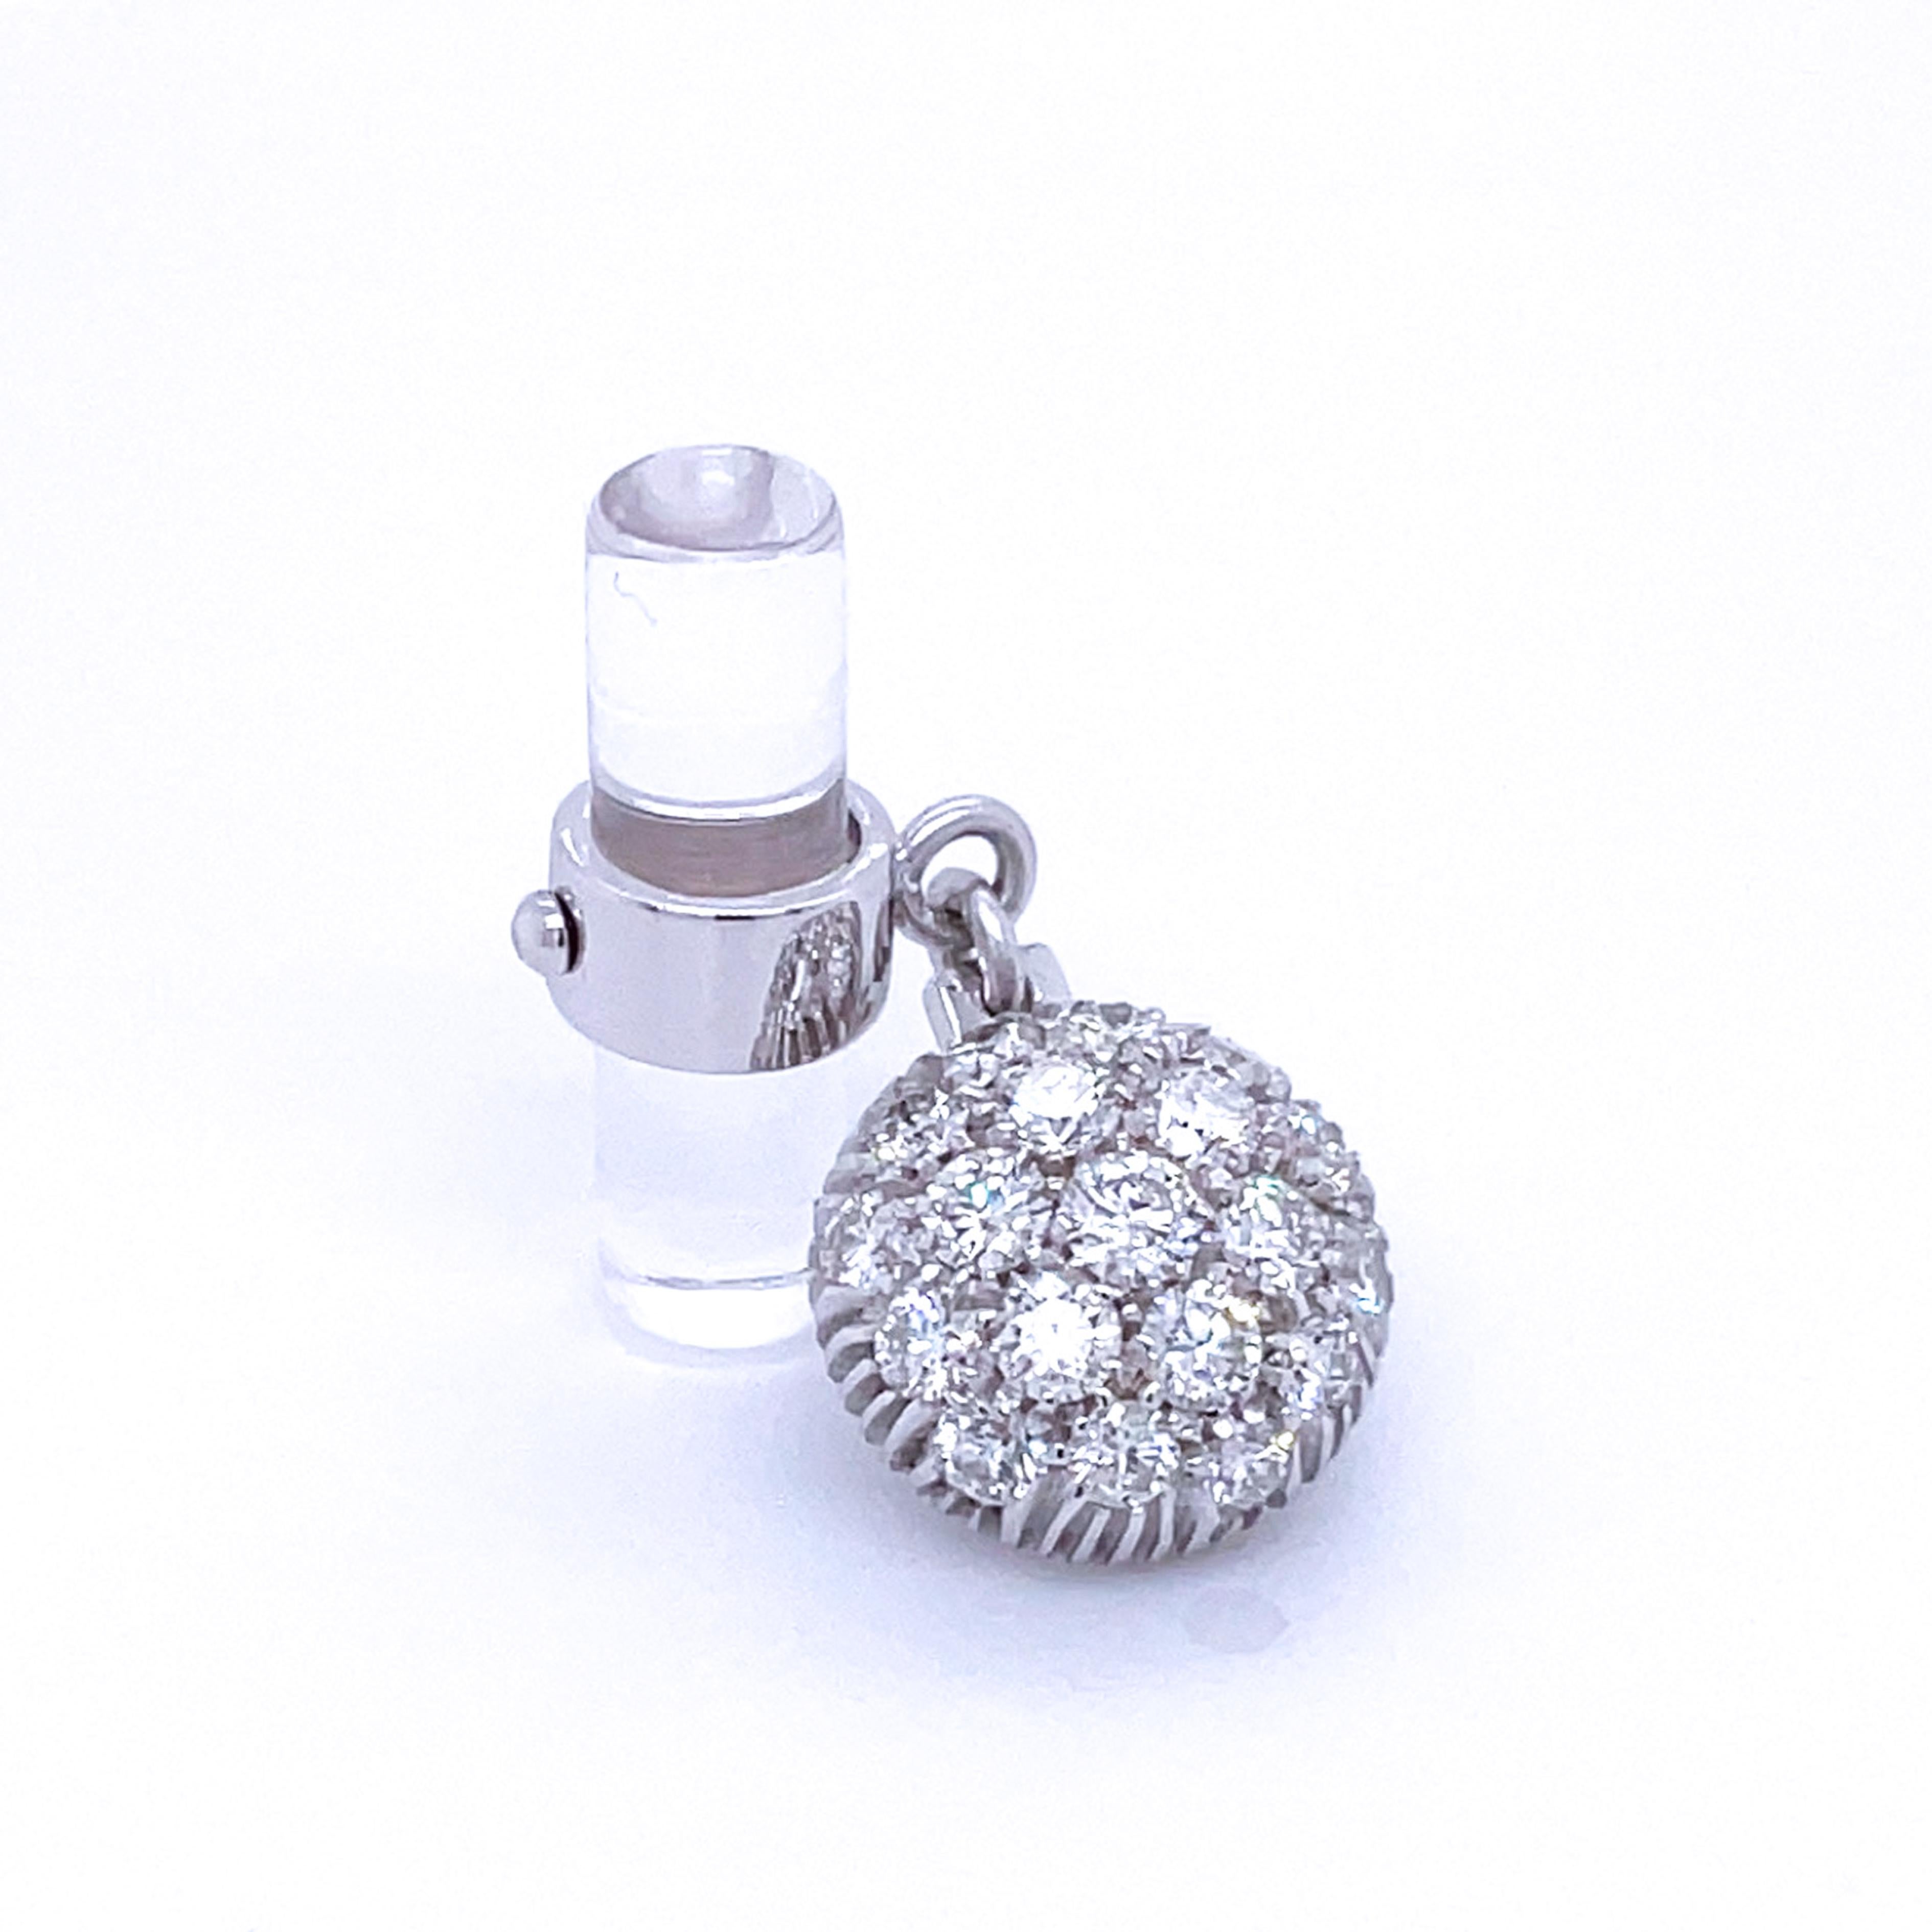 Absolutely Chic, Smart yet Timeless 1.81 Carat Top Quality Brilliant Cut White Diamond in a 0.28 OzT 18Kt White Gold Setting, 8.5 Carat Hand Inlaid Rock Crystal Stick Back.
In our fitted tobacco leather case and pouch.
